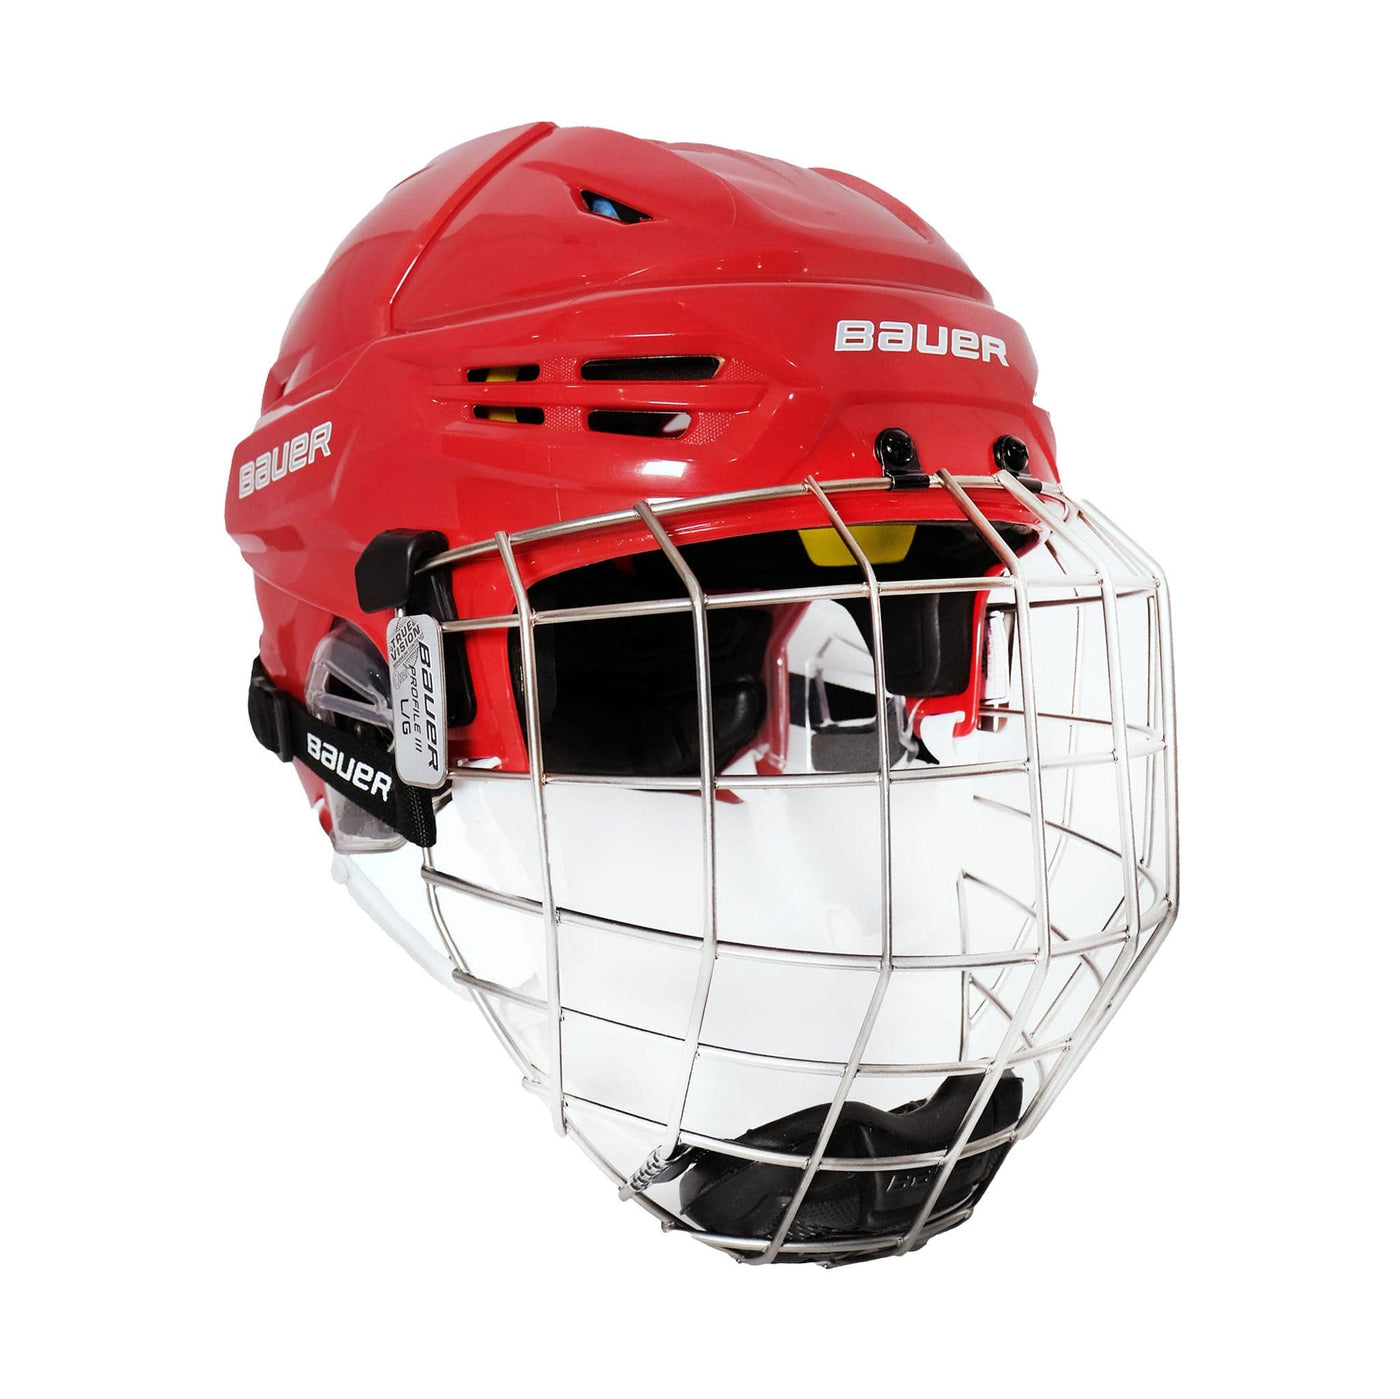 Bauer RE-AKT 95 Hockey Helmet / Cage Combo - The Hockey Shop Source For Sports